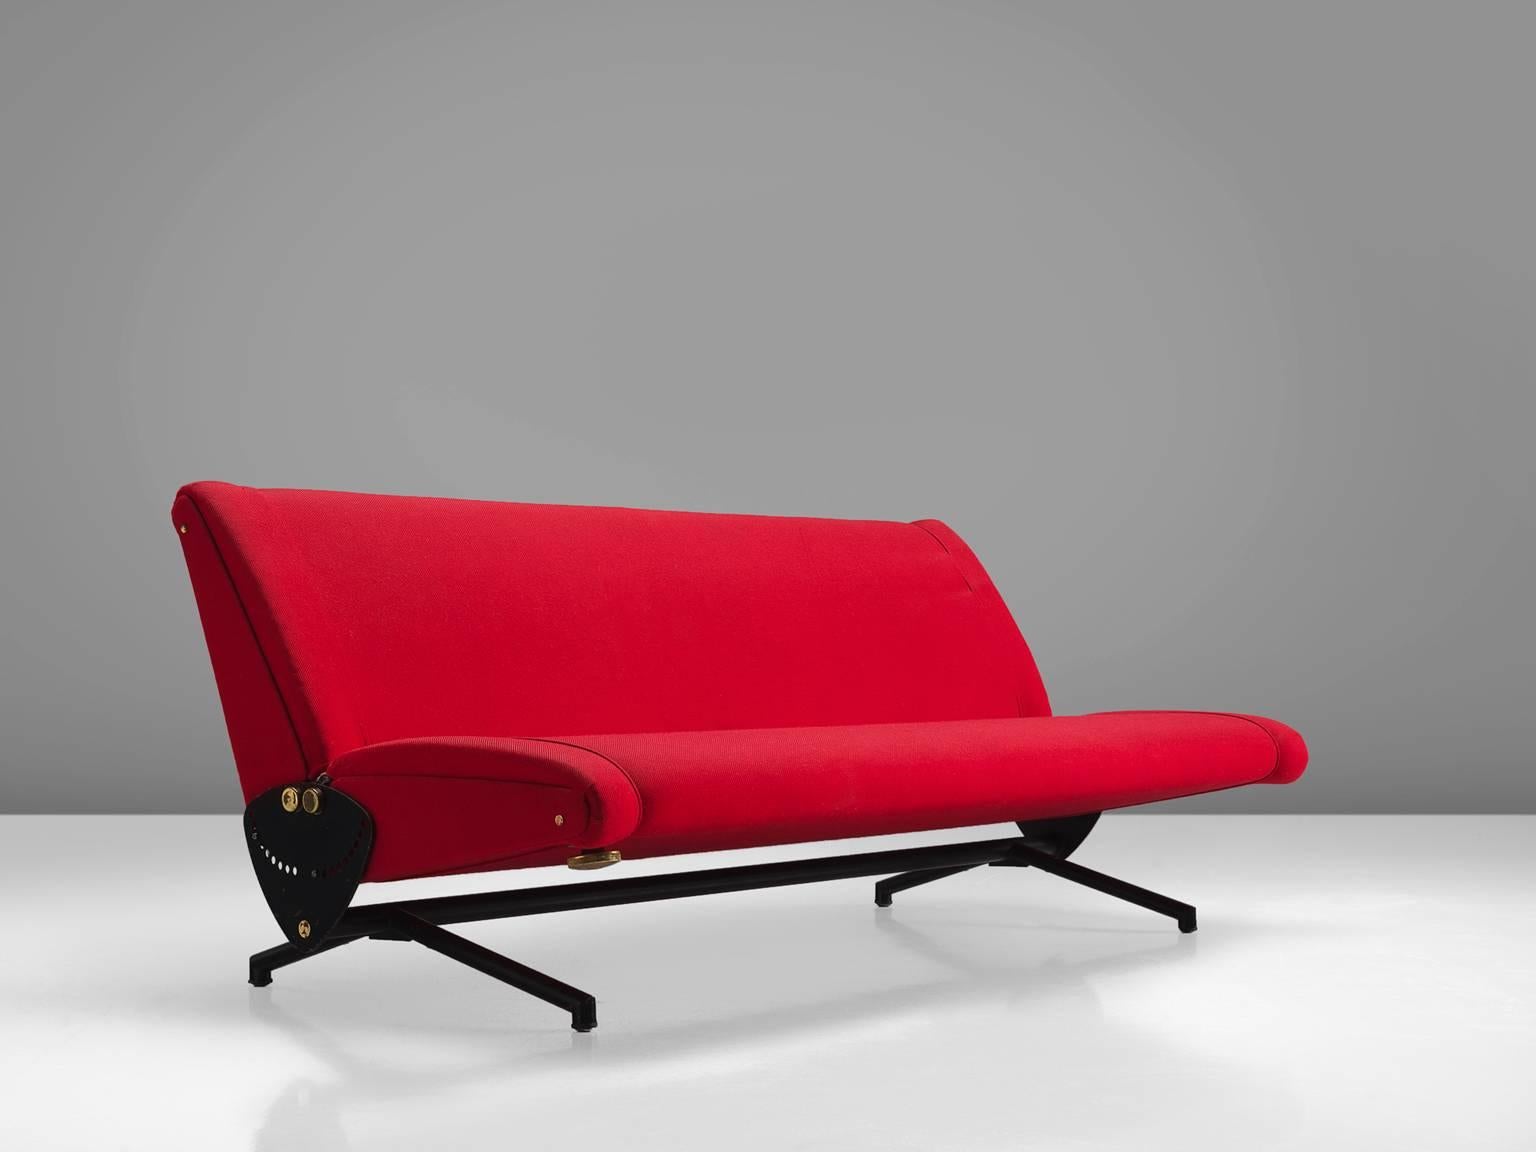 Osvaldo Borsani for Tecno, sofa and daybed model D70, in steel, brass and red fabric, Italy, 1954.

This adjustable sofa in red upholstery was presented on the Triennale of Milan in 1954 where it won the Gold Medal for design. No surprise as this